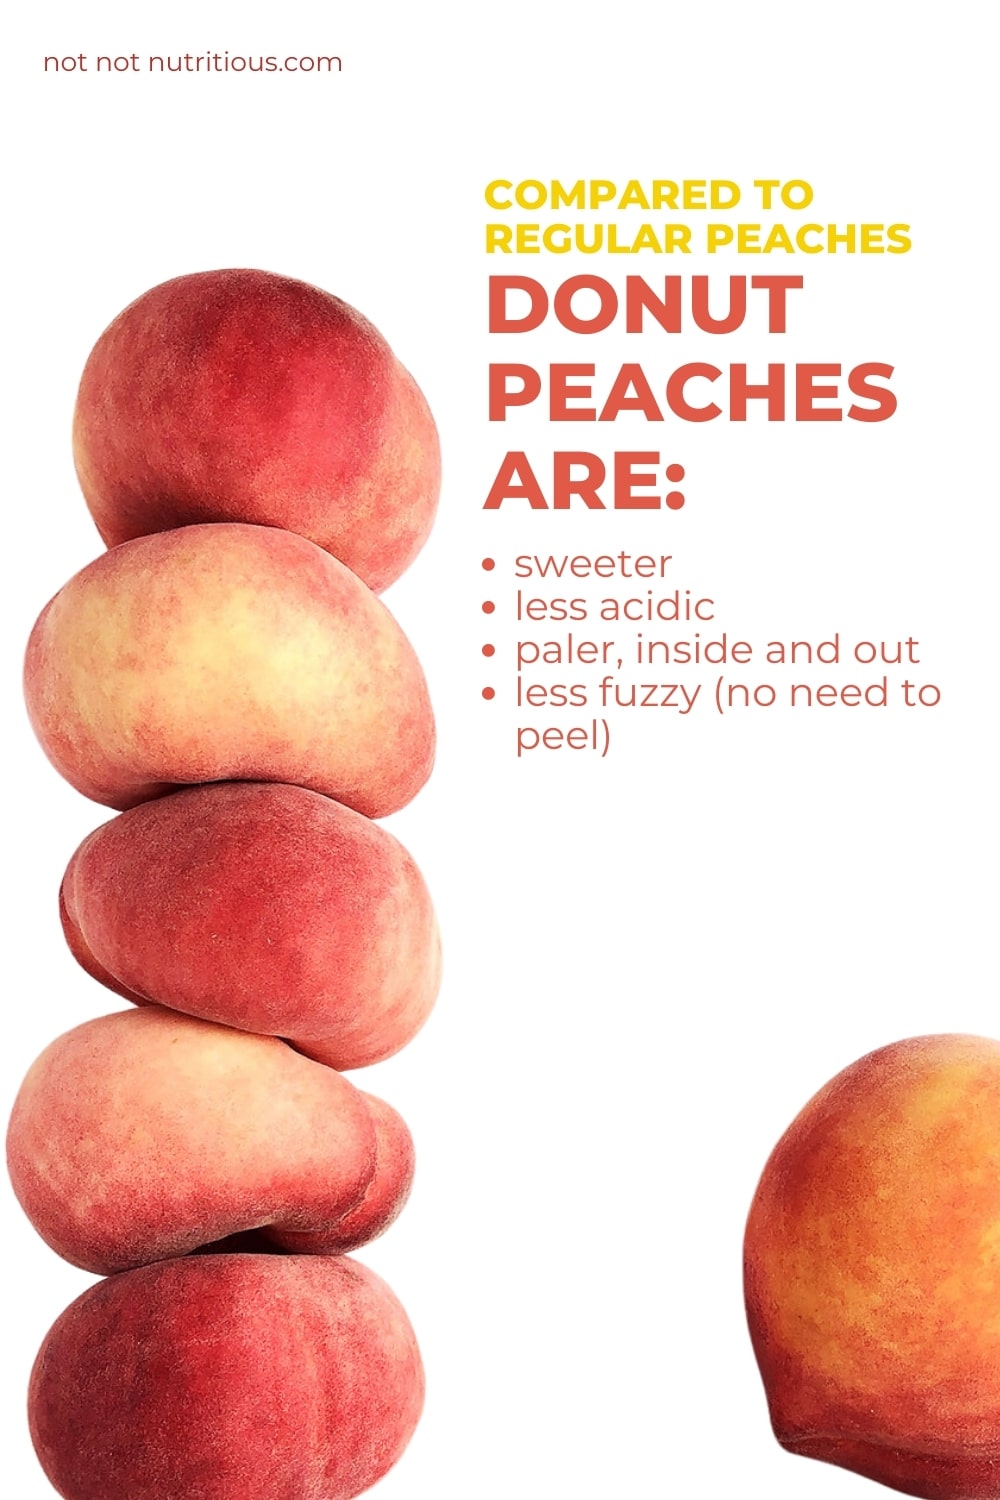 Infographic: Donut peaches versus regular peaches. Donut peaches are sweeter, less acidic, paler, inside and out, and less fuzzy so there is not need to peel them. 